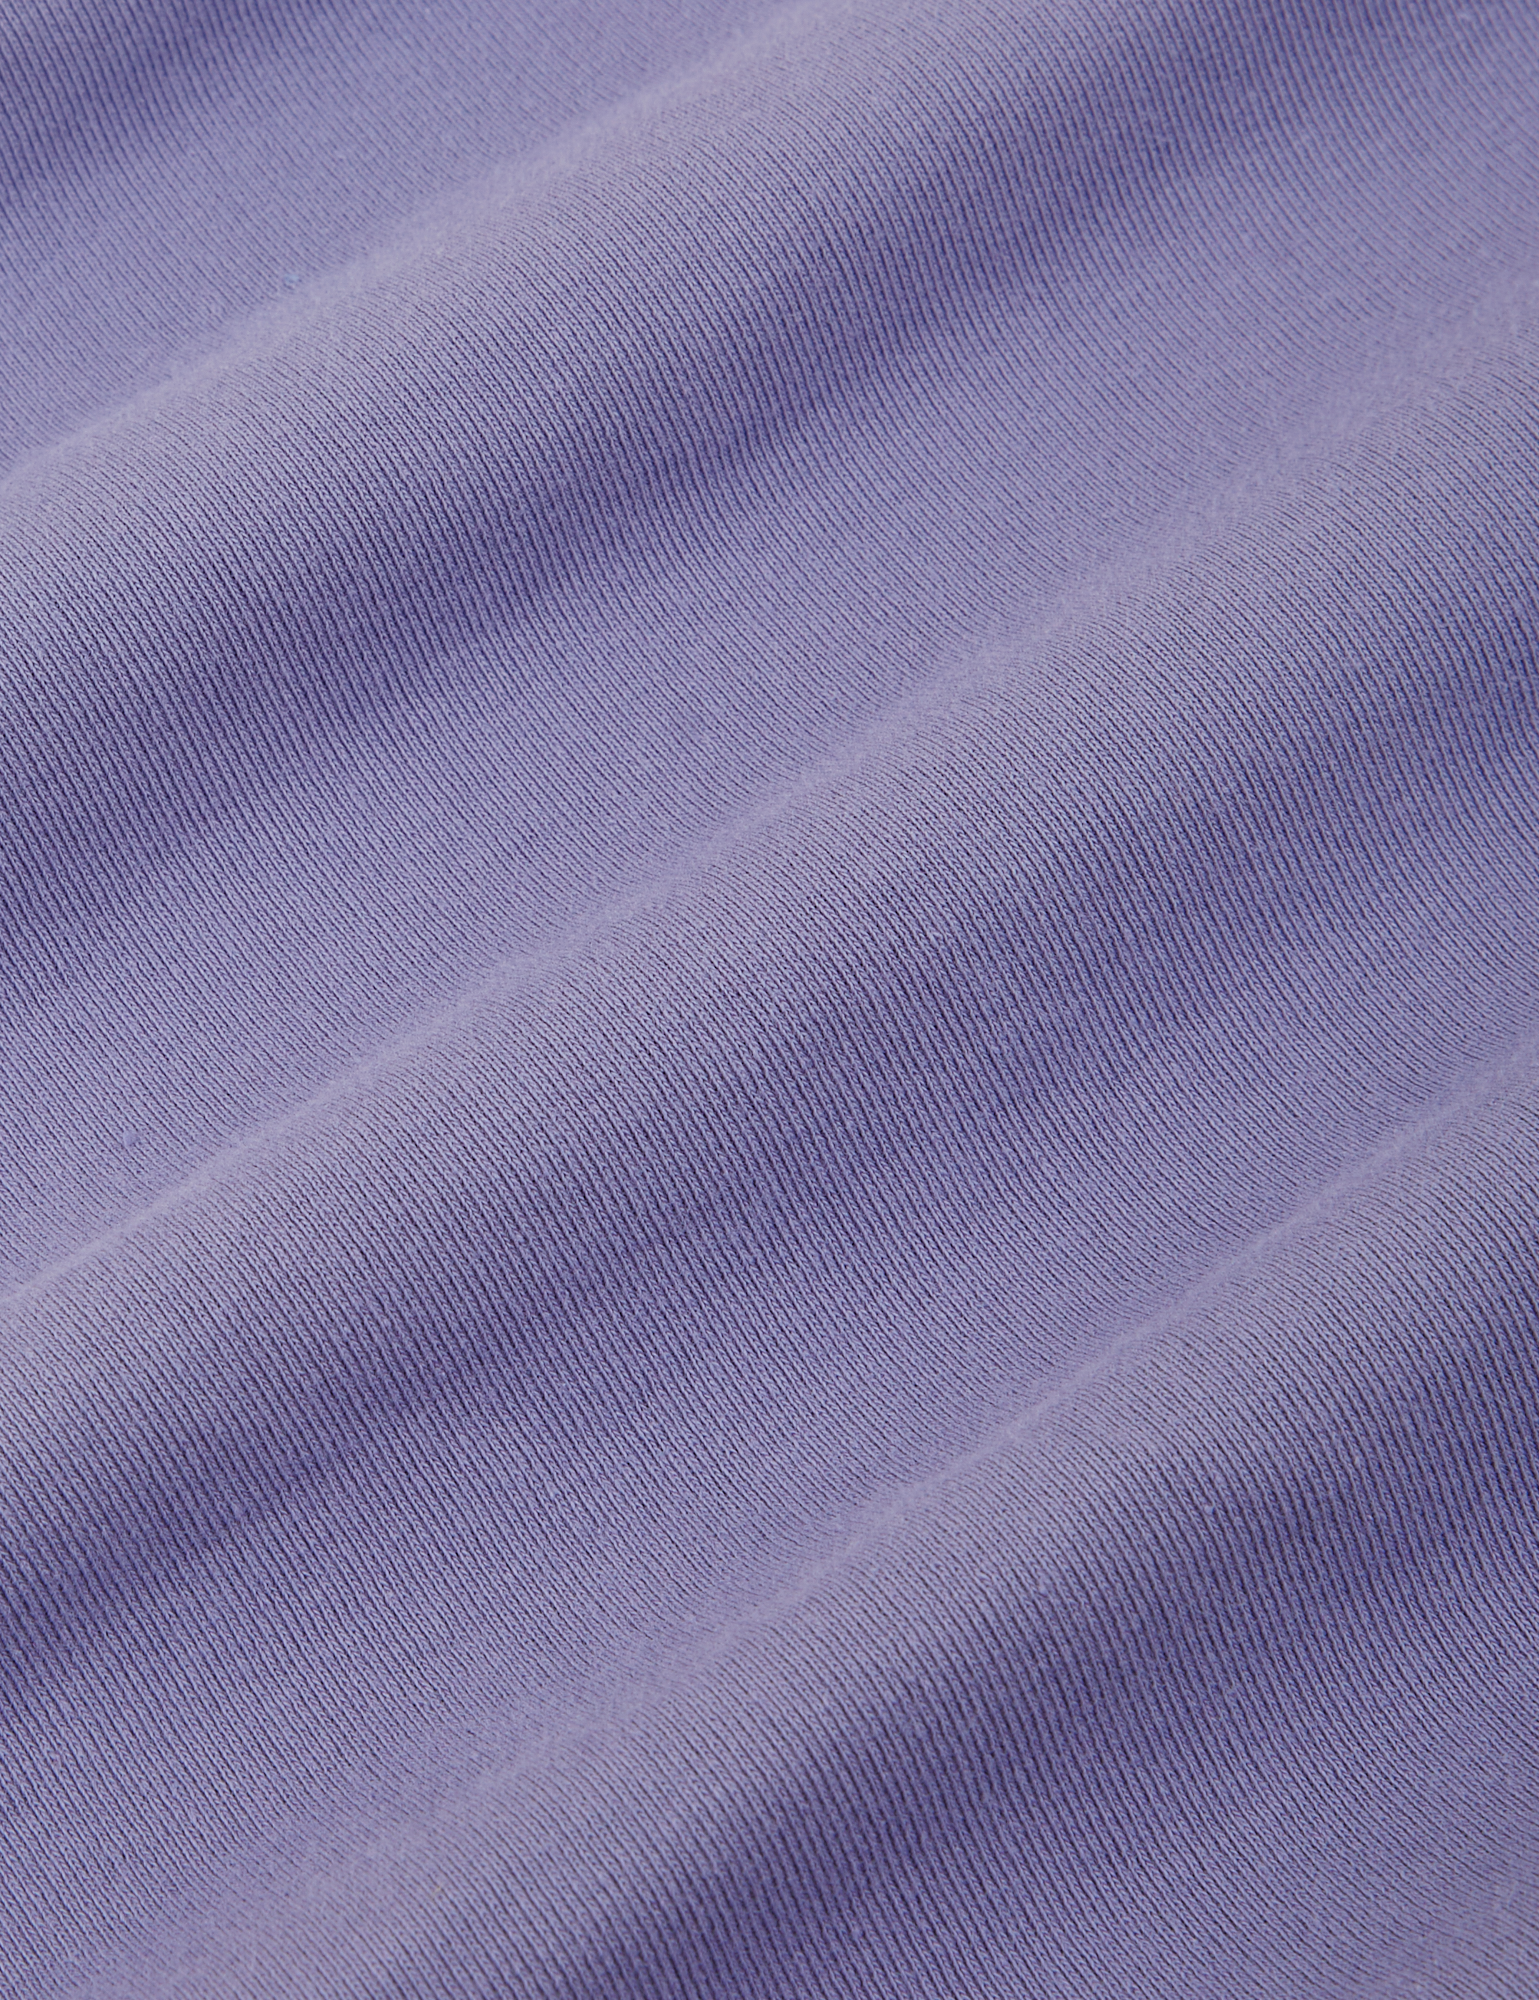 The Tank Top in Faded Grape fabric detail